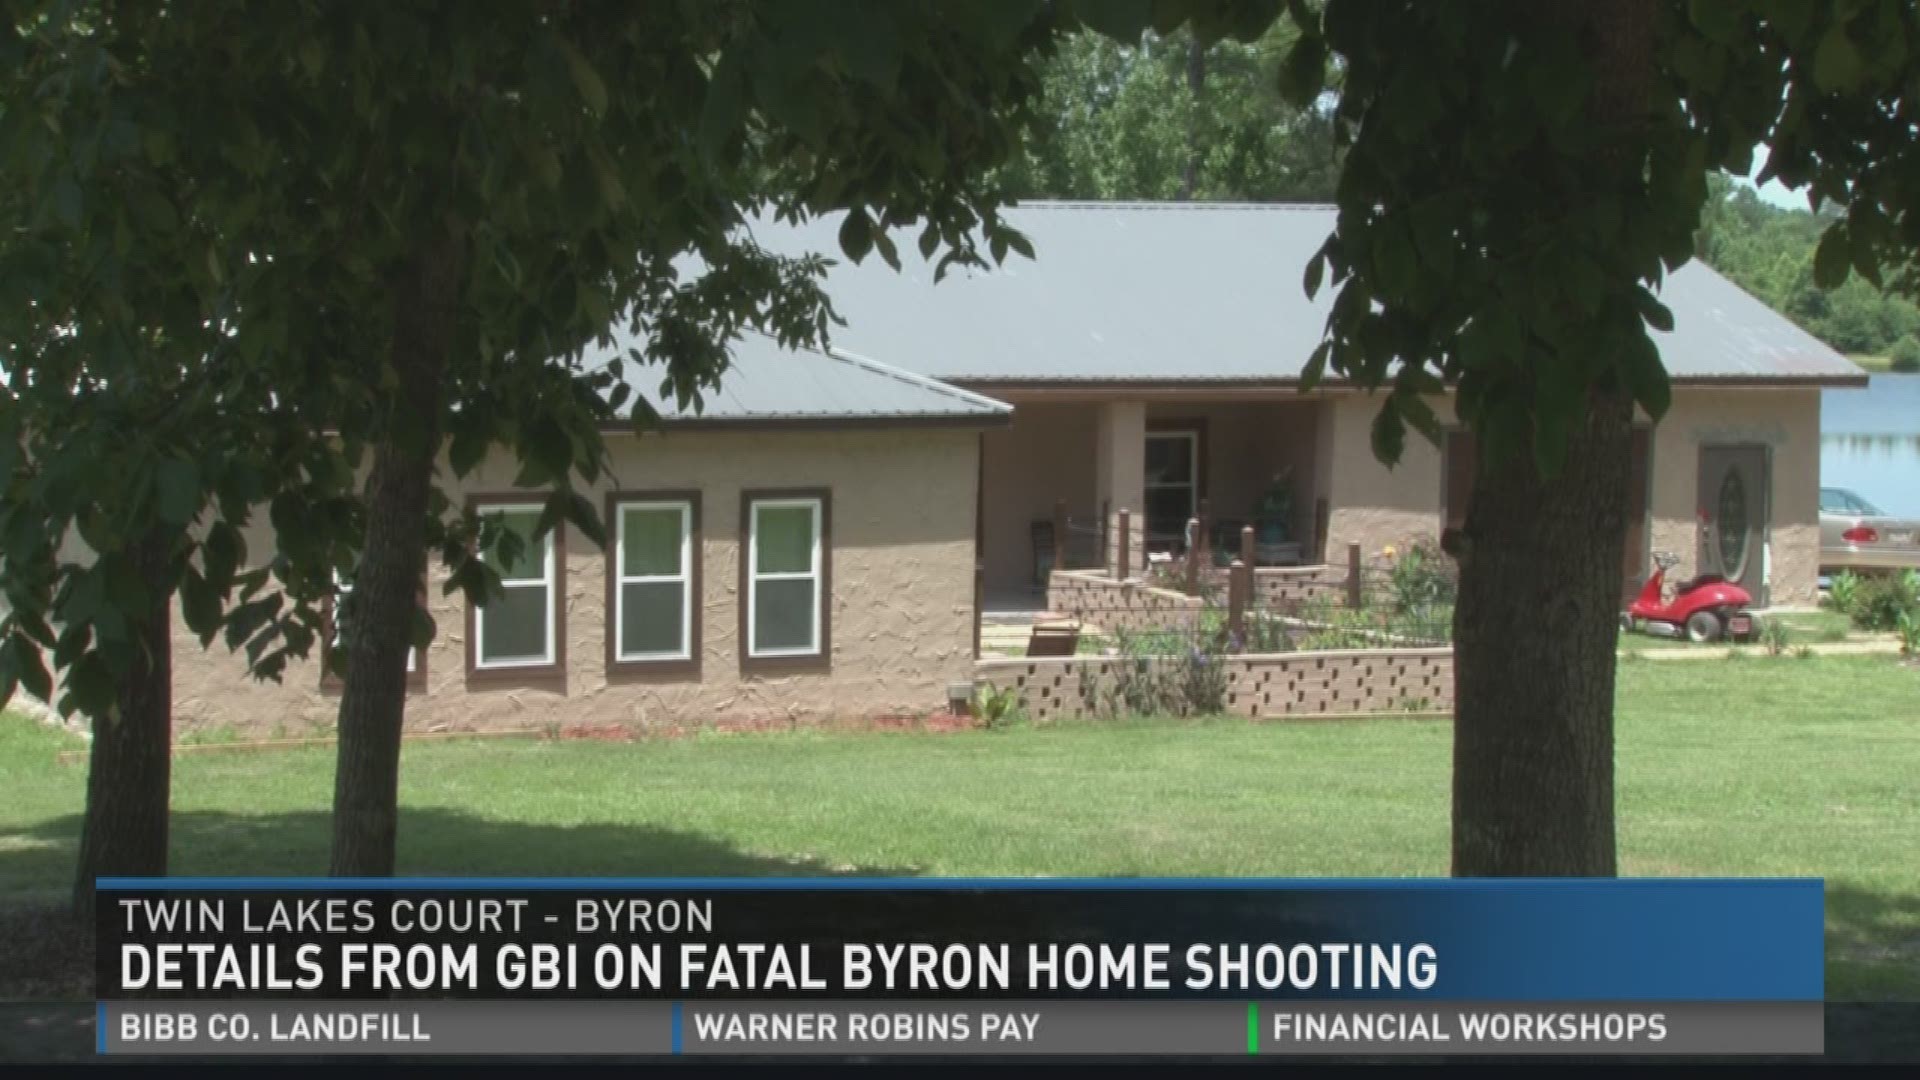 Details from GBI on fatal Byron home shooting